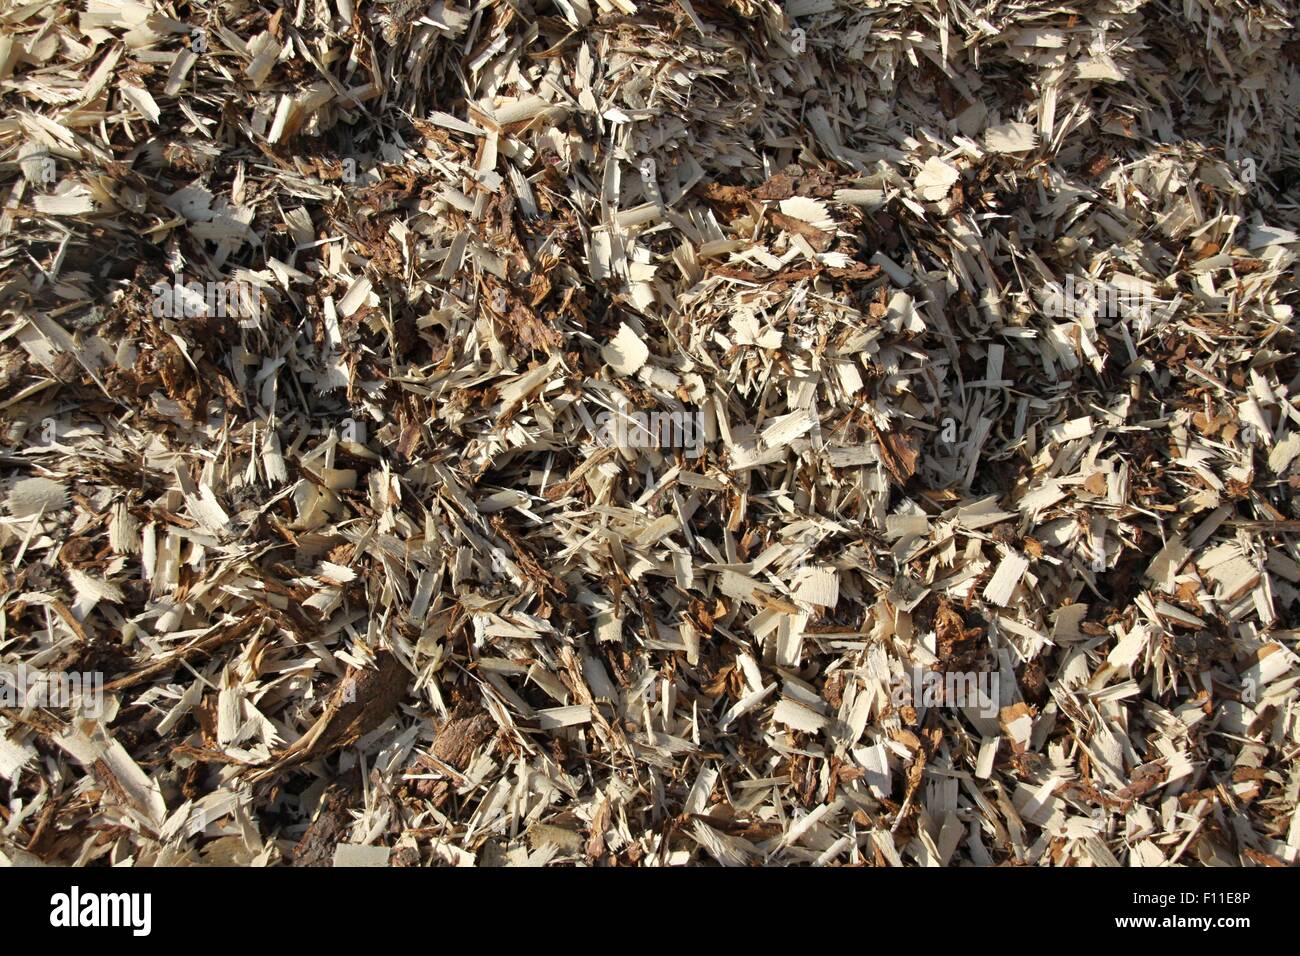 White and brown wood chips as natural background Stock Photo